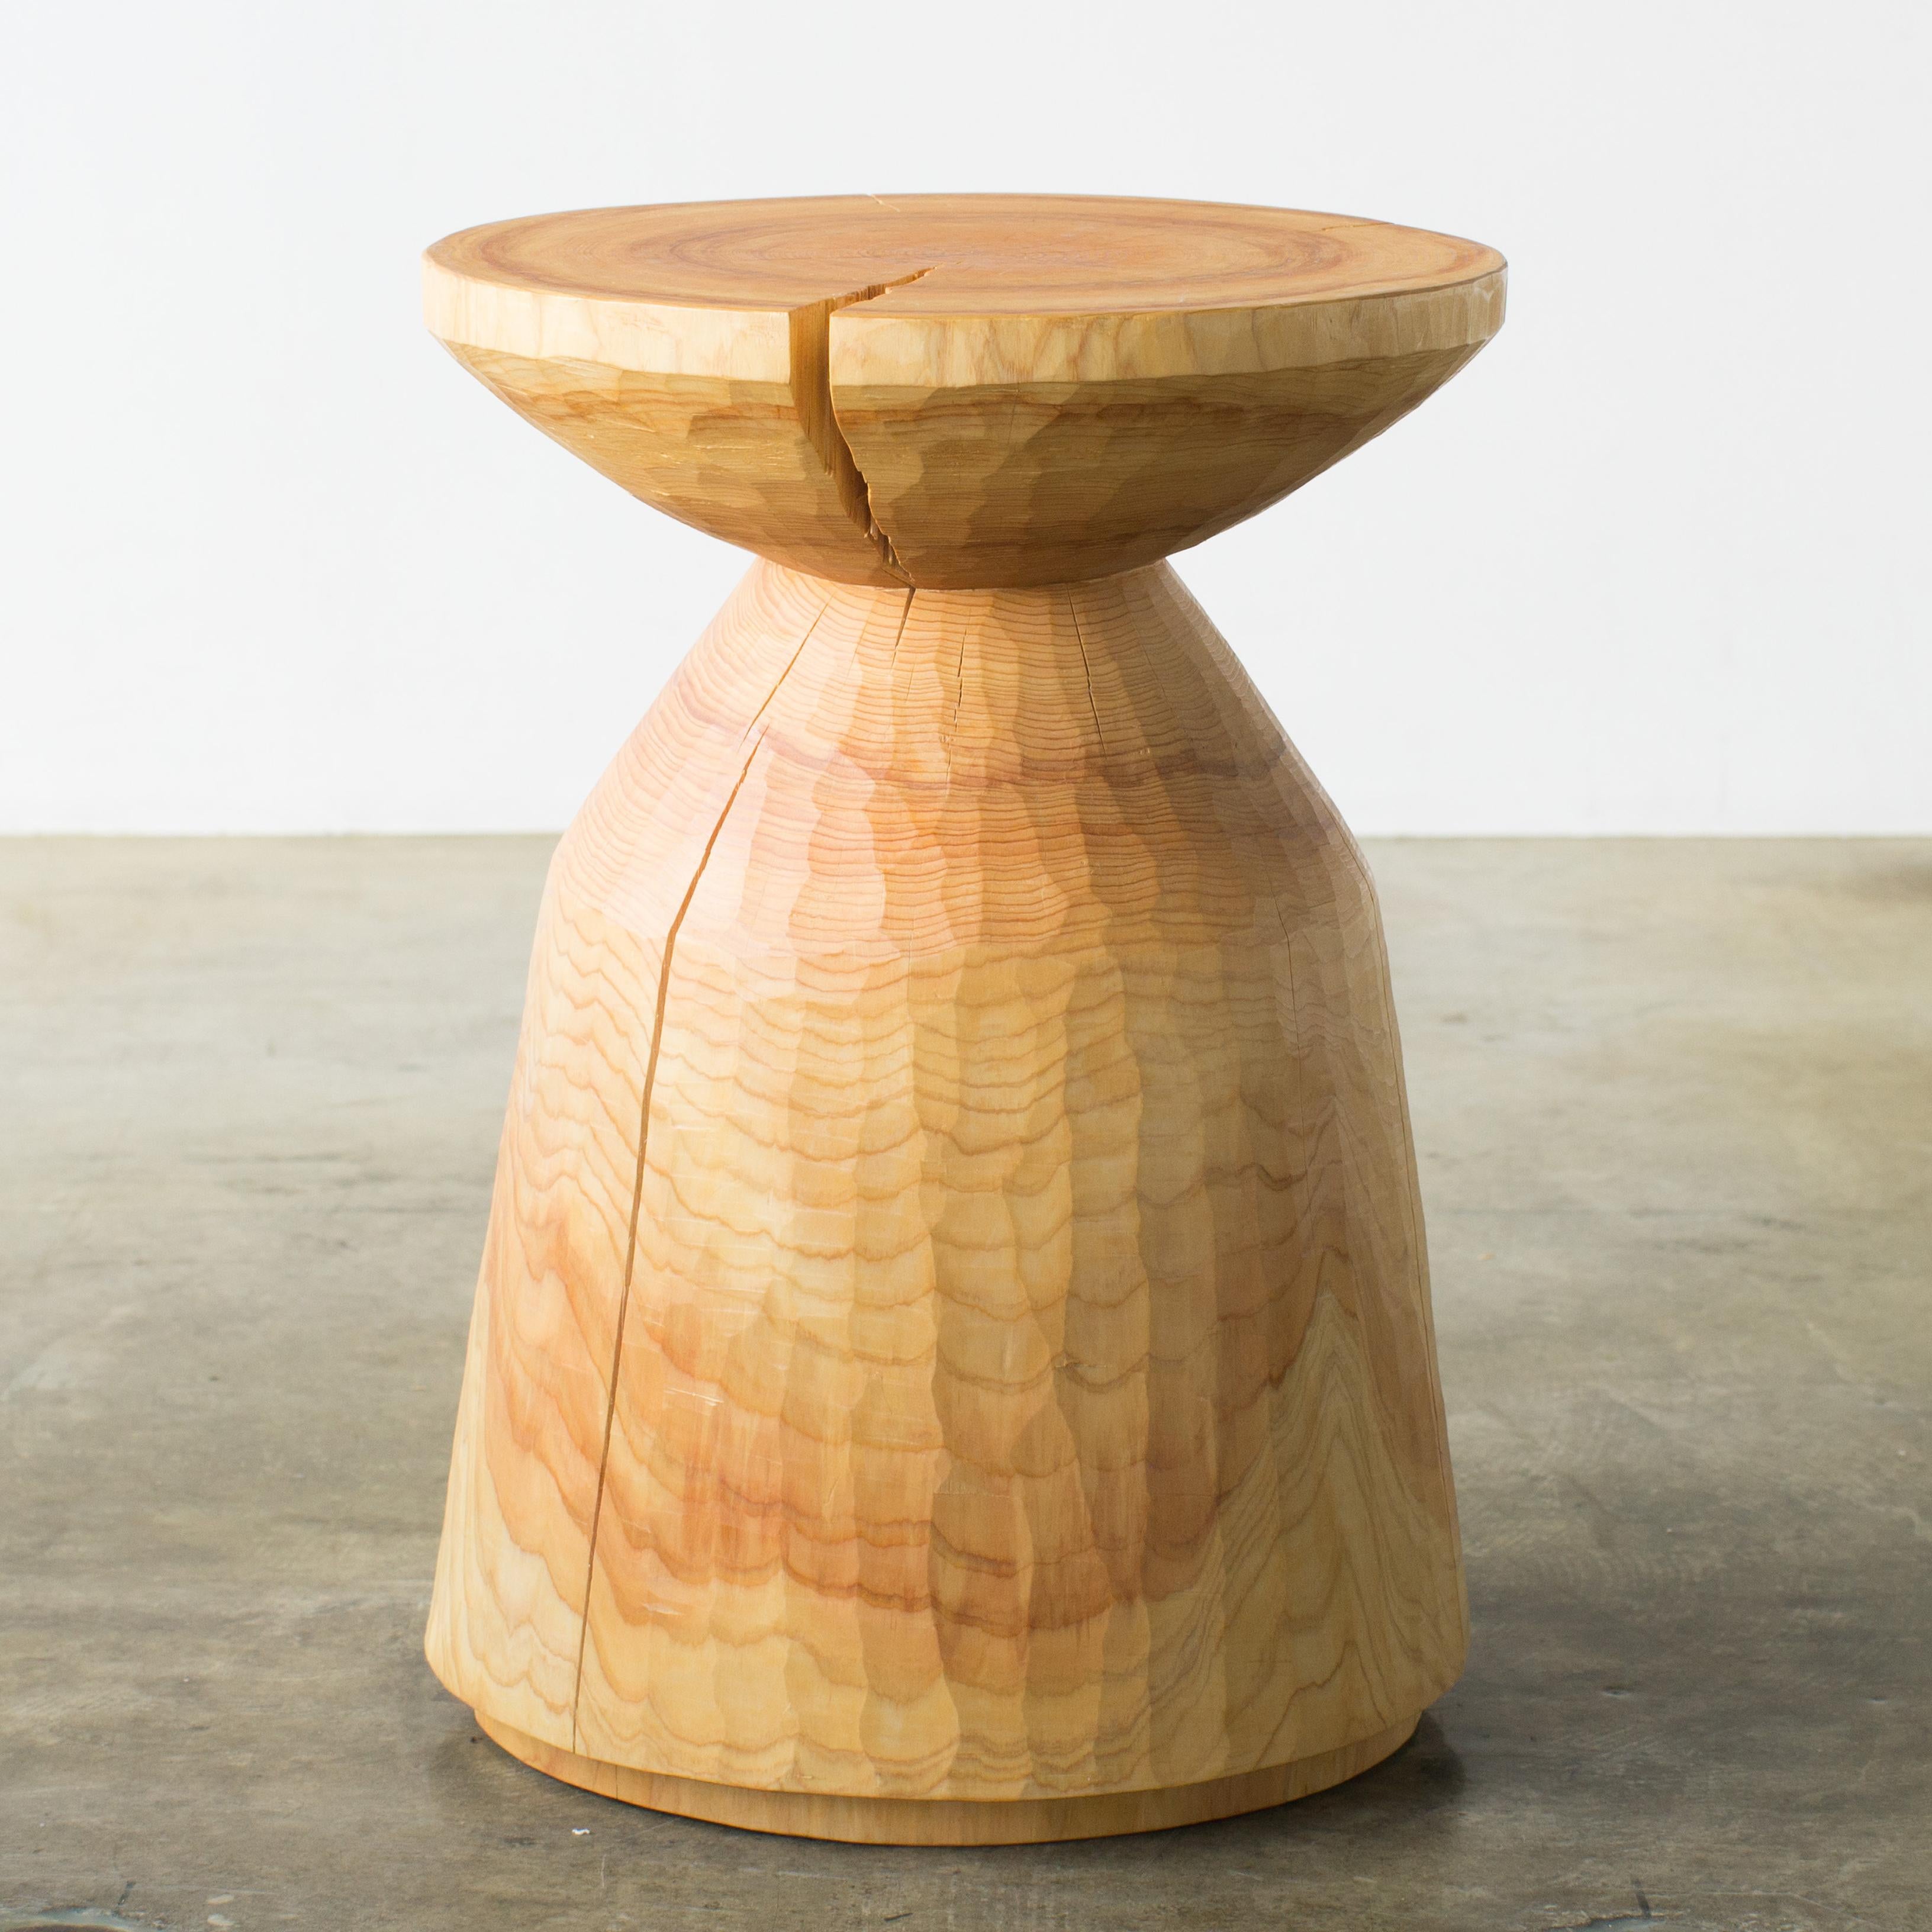 Name: A day go to the hill
Sculptural stool by Hiroyuki Nishimura and zone carved furniture
Material: Cypress
This work is carved from log with some kinds of chainsaws.
Most of wood used for Nishimura's works are unable to use anything, these